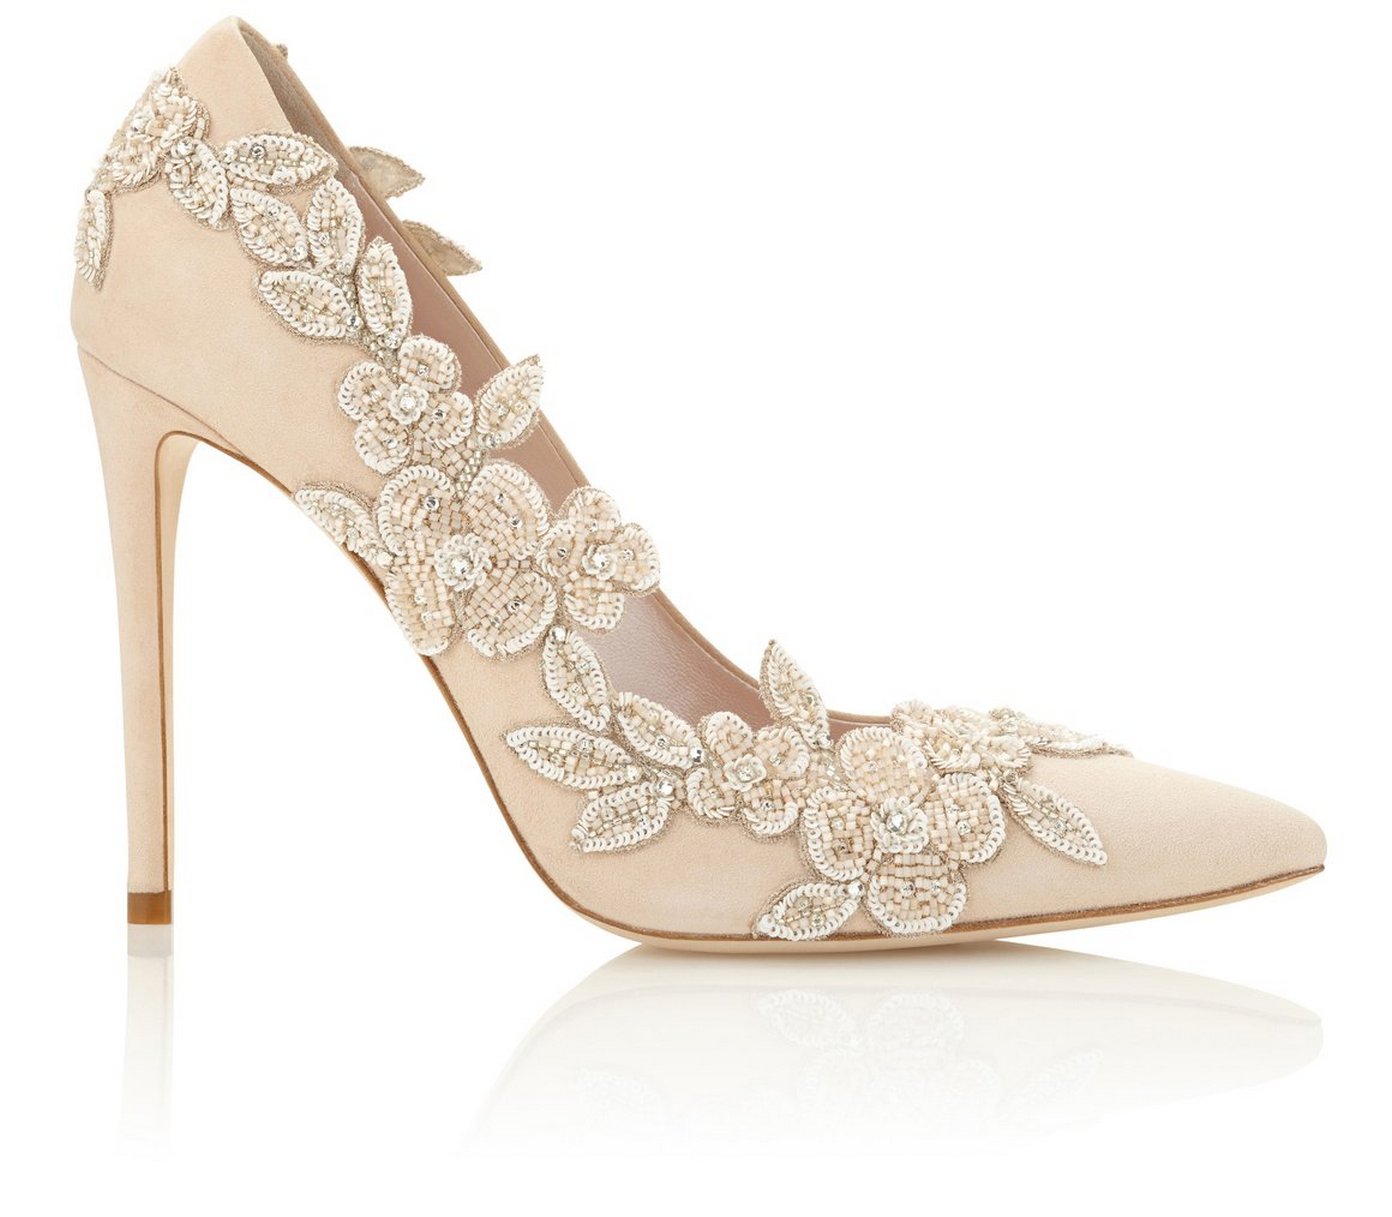 Floral Wedding Shoes Ideas You Never Seen Before 37 – Style Female